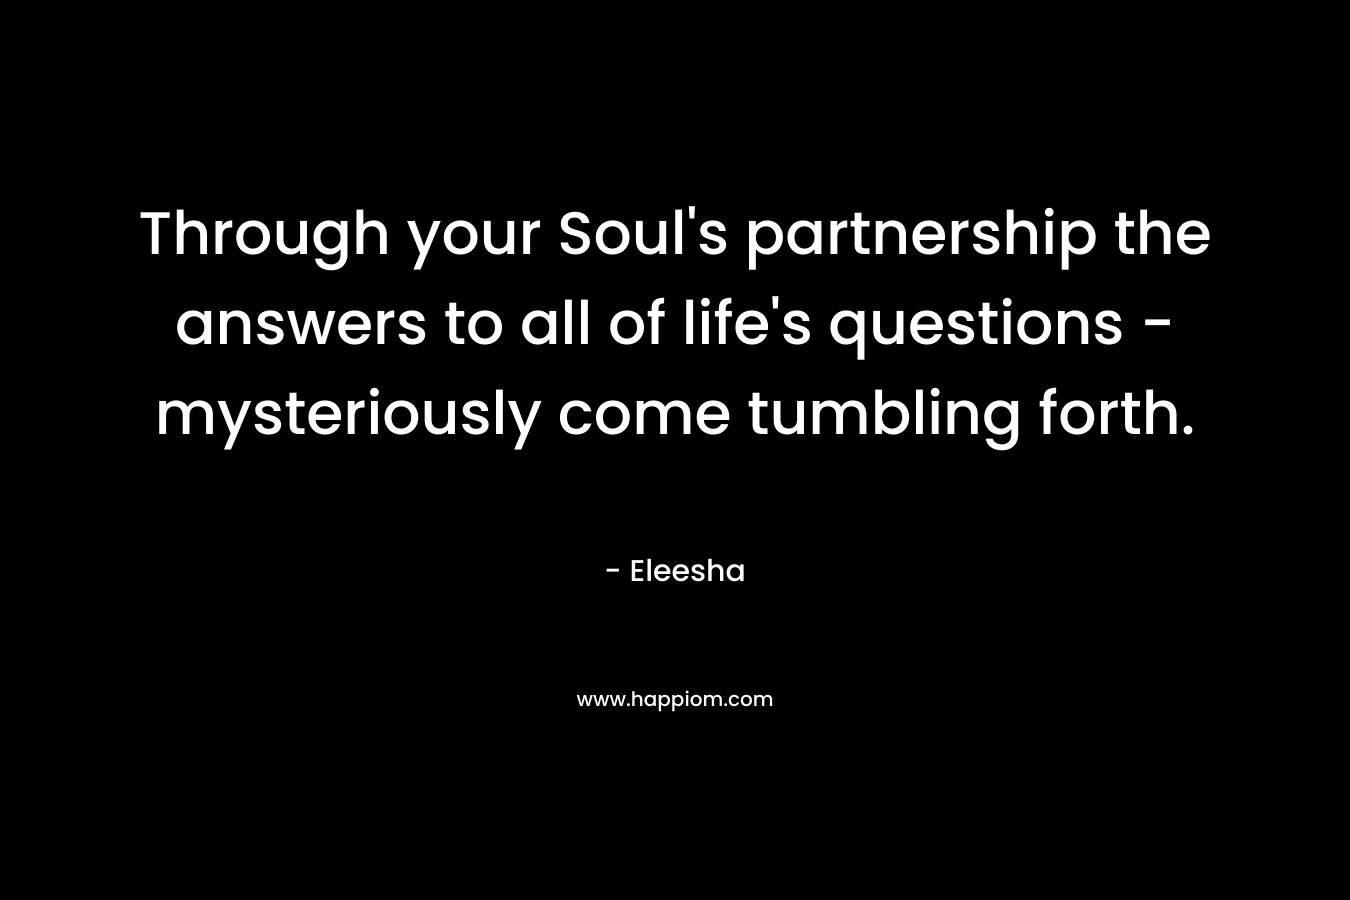 Through your Soul's partnership the answers to all of life's questions - mysteriously come tumbling forth.